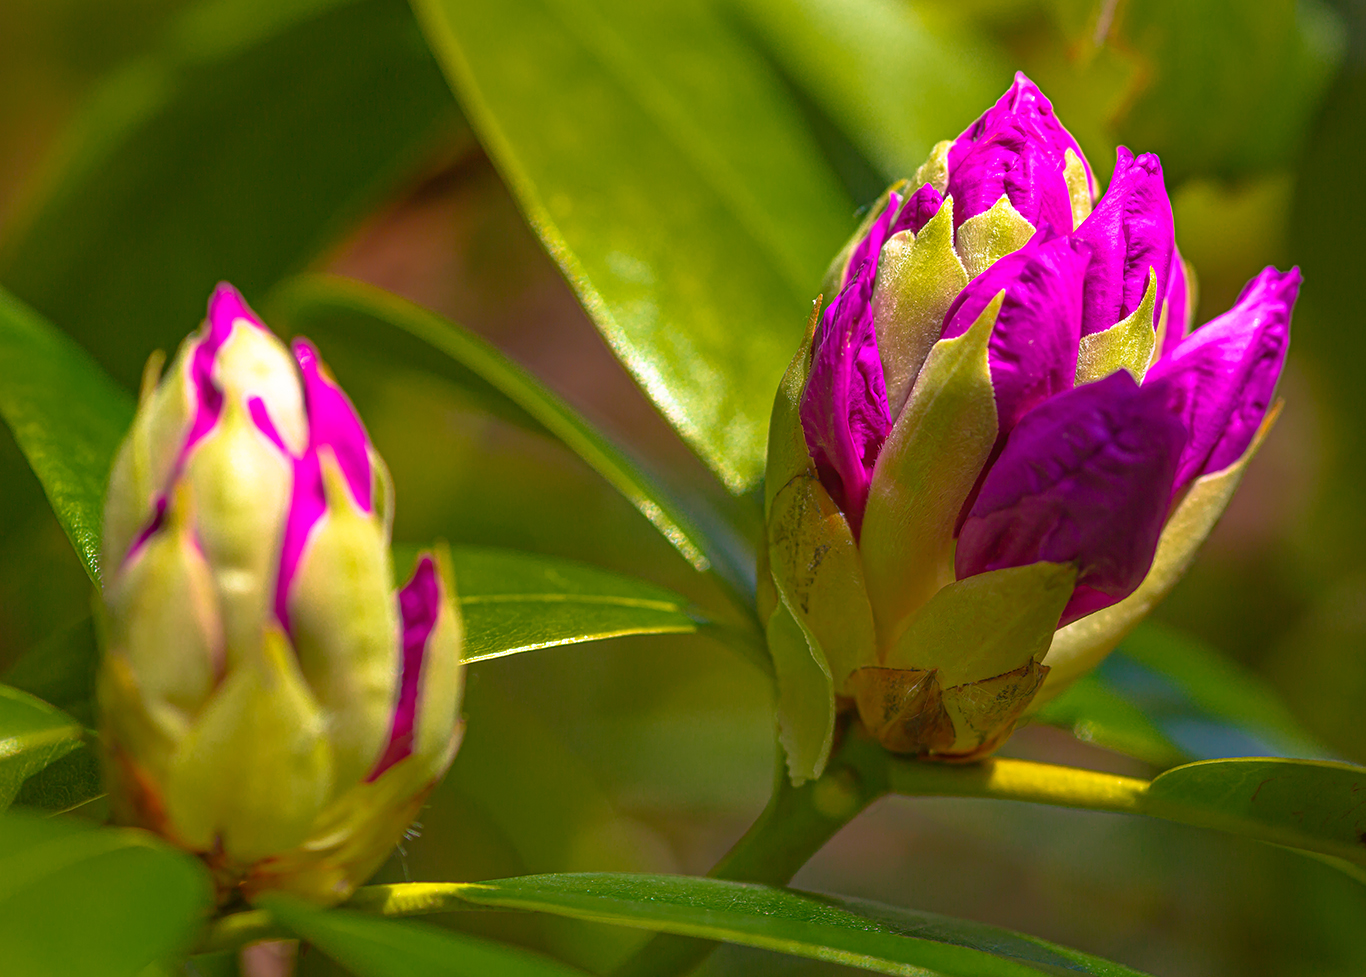 rhododendron buds